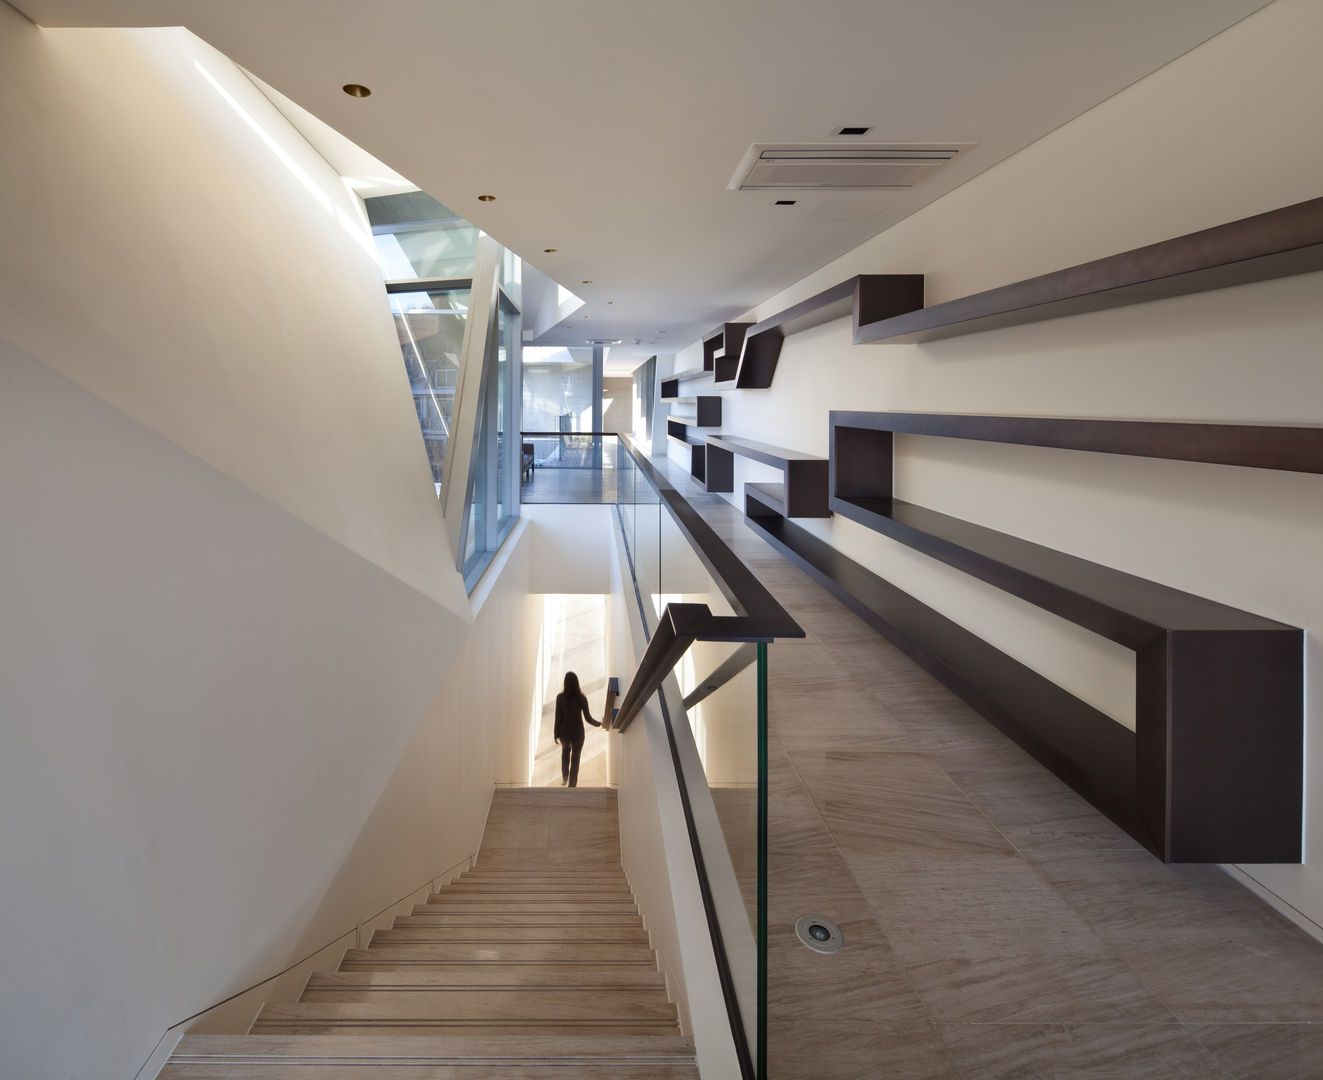 Guesthouse Rivendell, KWAK, HEESOO [IDMM Architects] KWAK, HEESOO [IDMM Architects] Modern Corridor, Hallway and Staircase